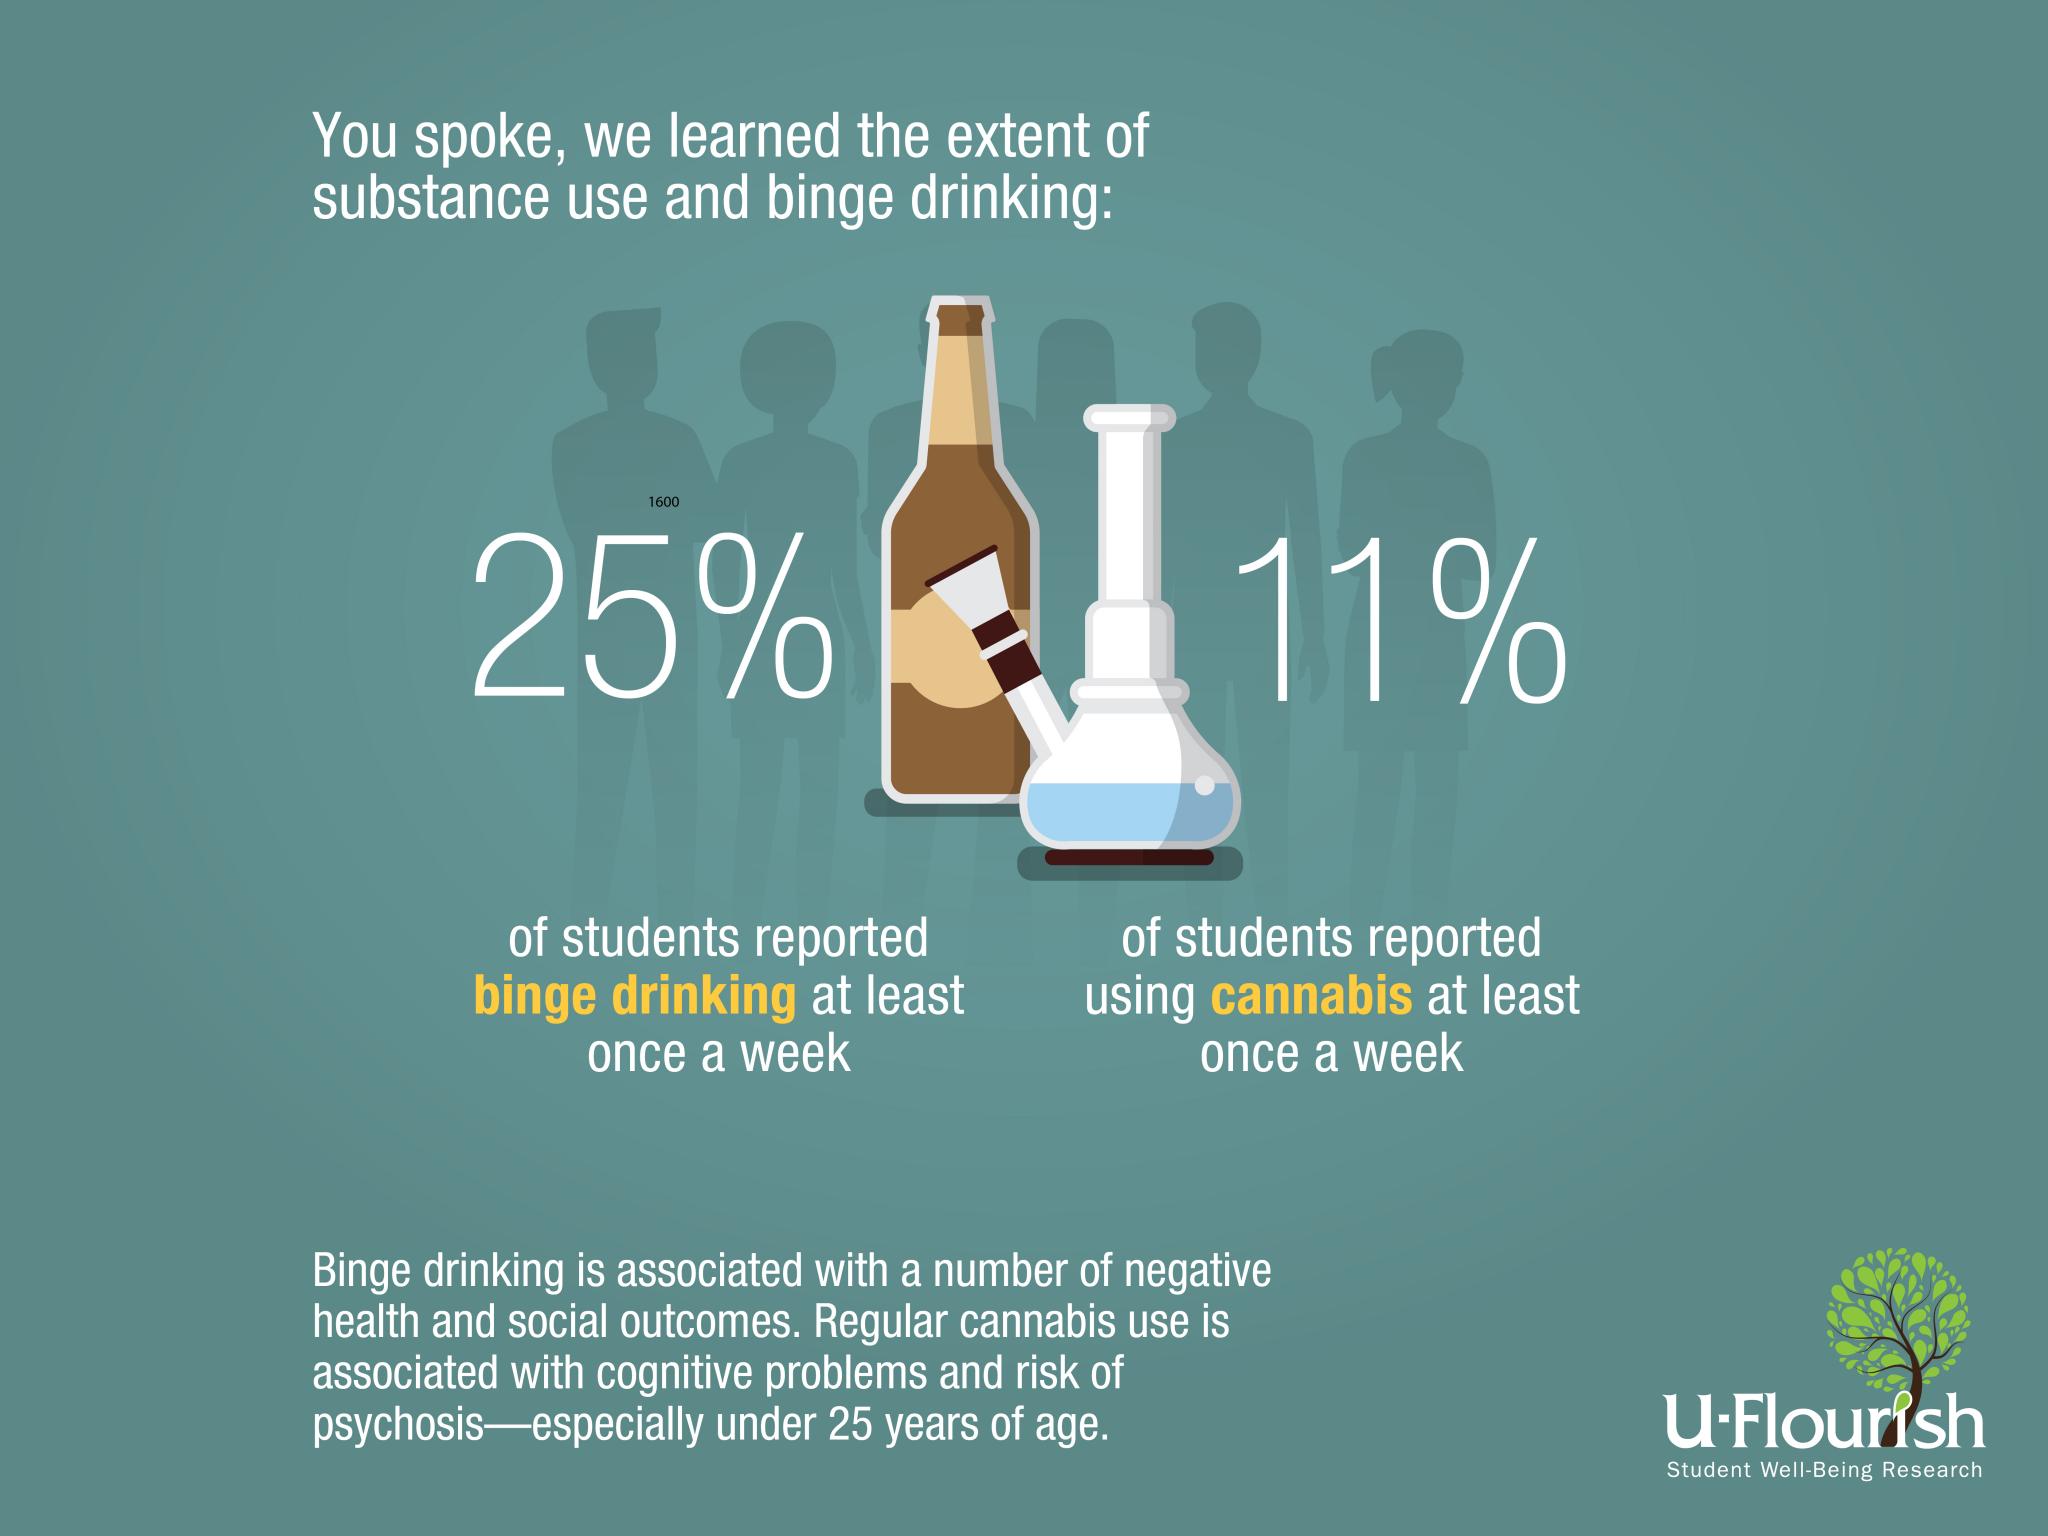 We learned the extent of substance use and binge drinking. With 25% of students reporting binge drinking at least once a week; and 11% reported using cannabis at least once a week. 